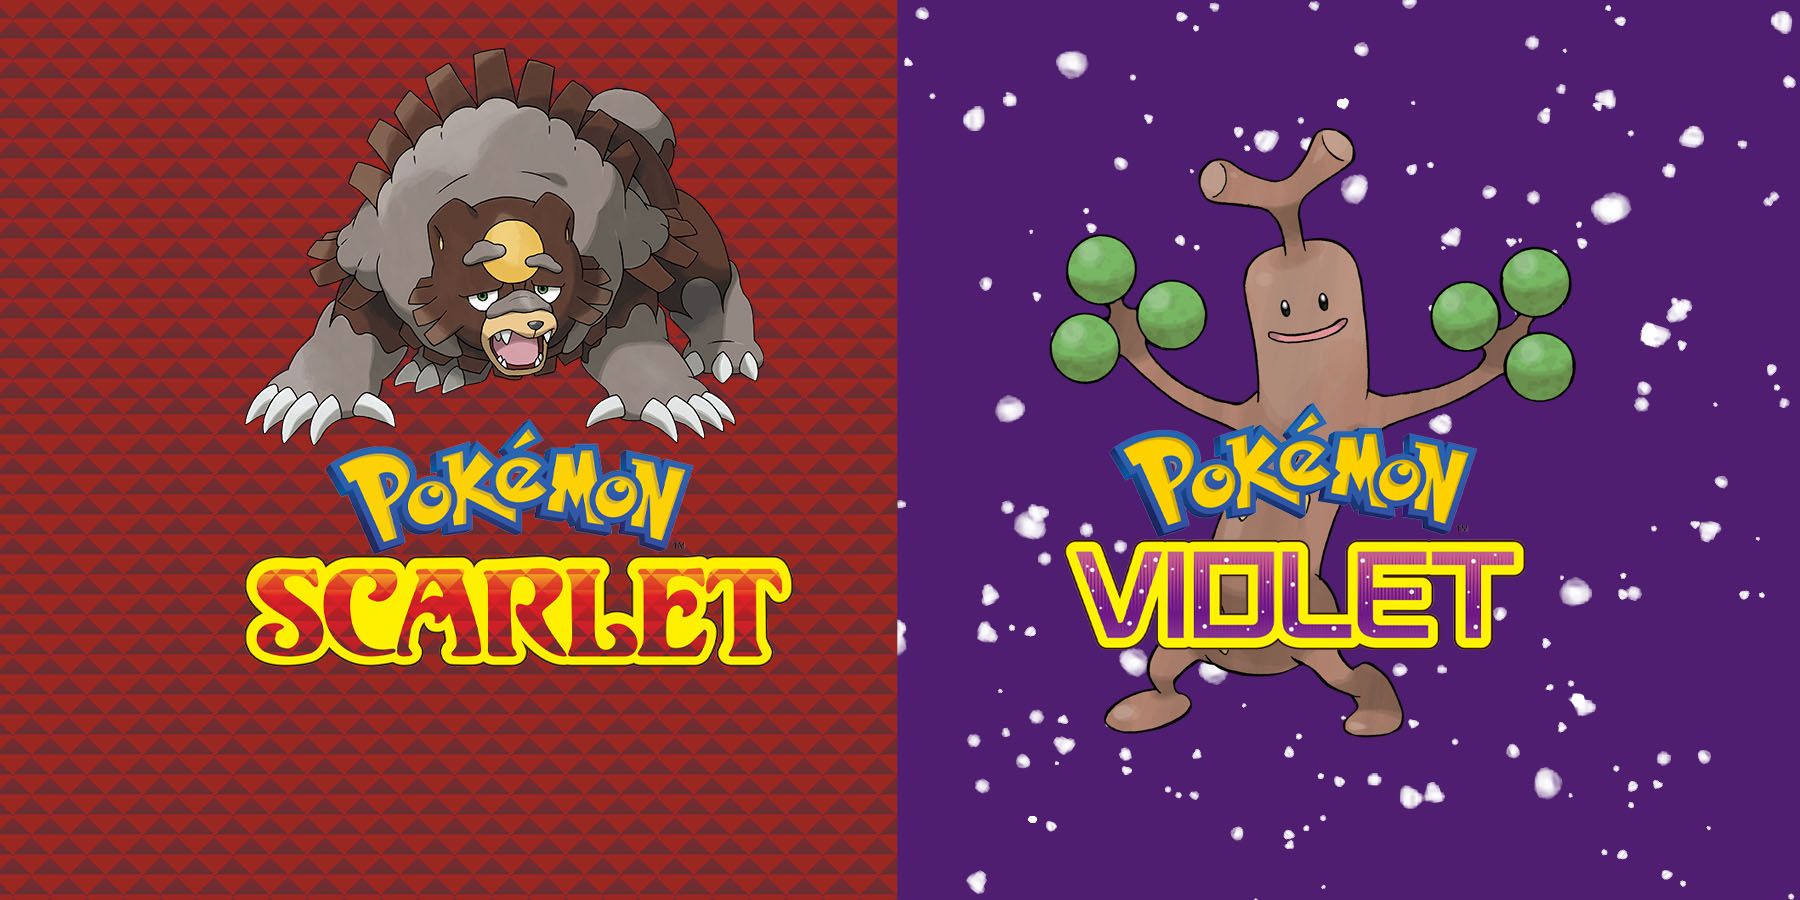 The Pokemon Scarlet and Violet text logos with Ursaluna and Sudowoodo in the background.